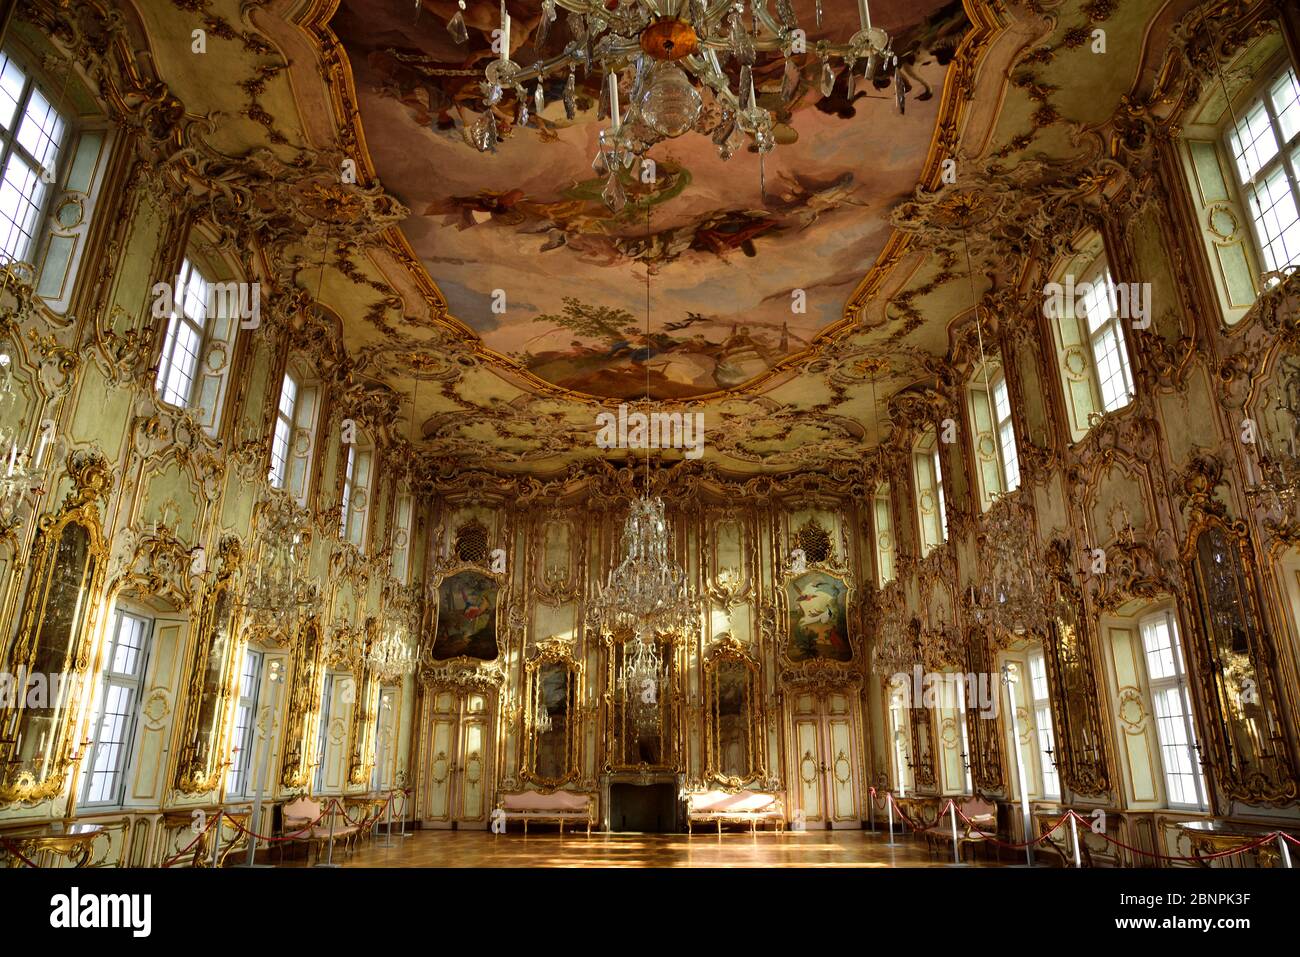 Europe, Germany, Bavaria, Swabia, Augsburg, Schaetzler-Palais, Rococo style, built 1765 to 1770, large ballroom, ceiling painting, Stock Photo